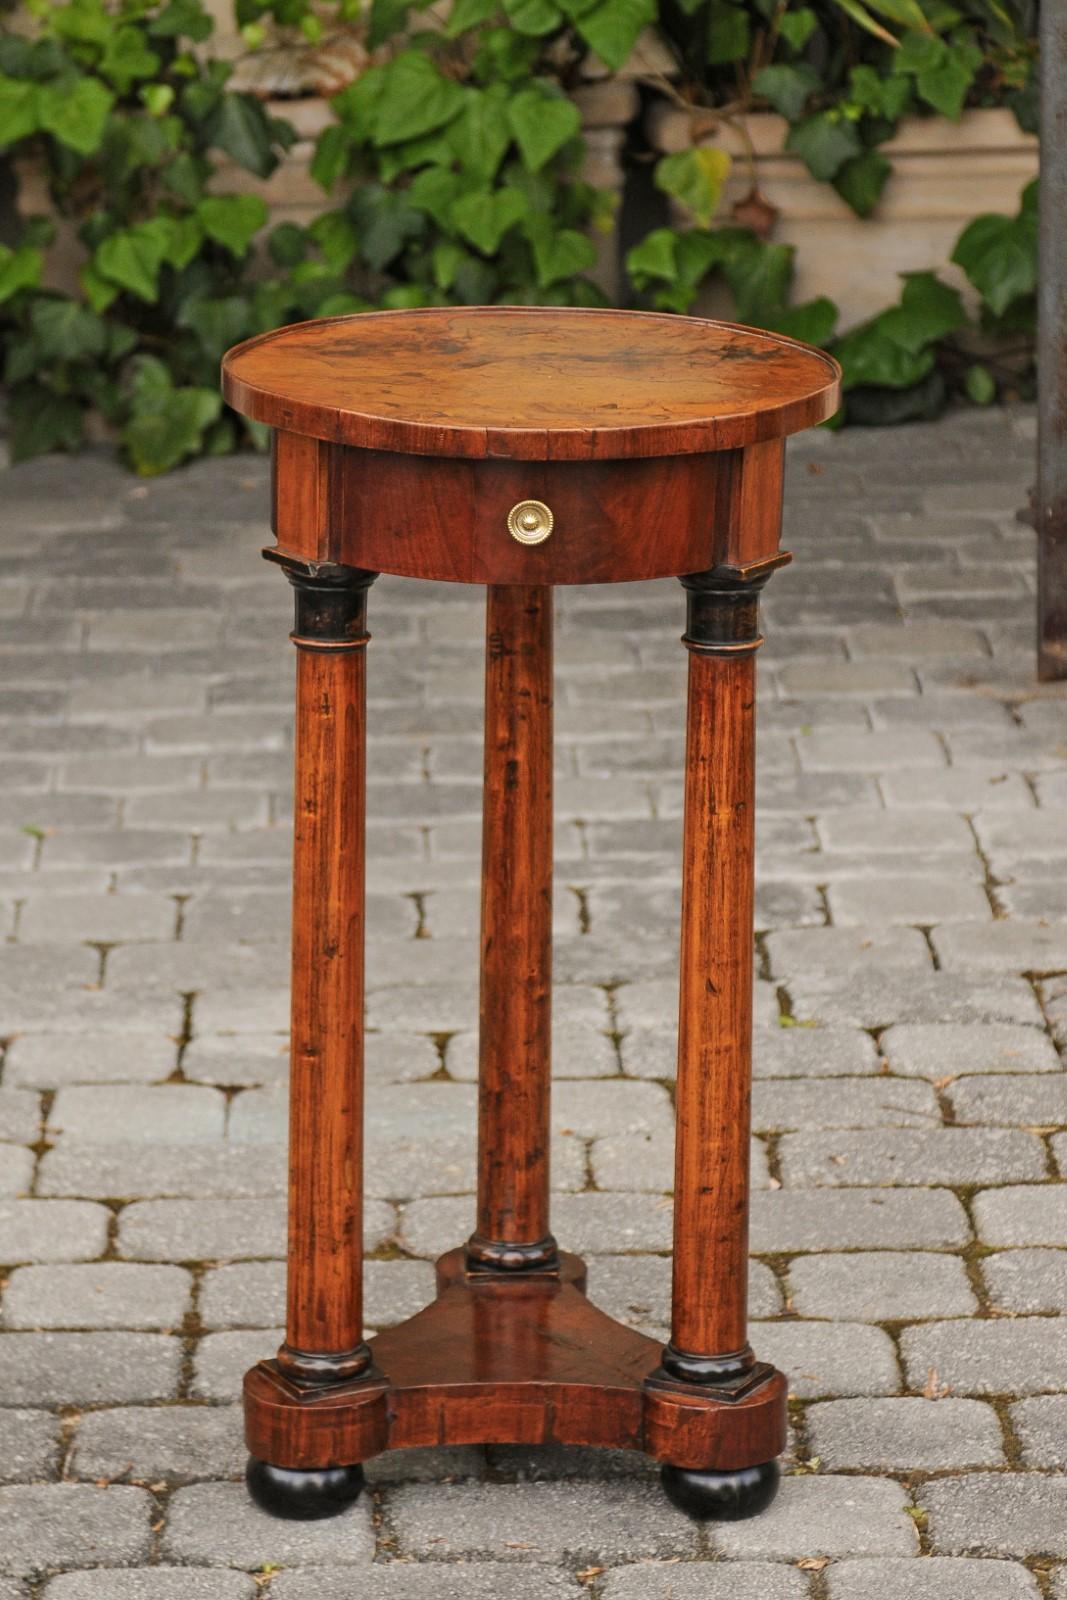 A French Empire walnut pedestal table from the early 19th century, with single drawer, Doric capitals, lower shelf and bun feet. Born in France during the early years of the 19th century, this exquisite guéridon features a circular top, adorned with